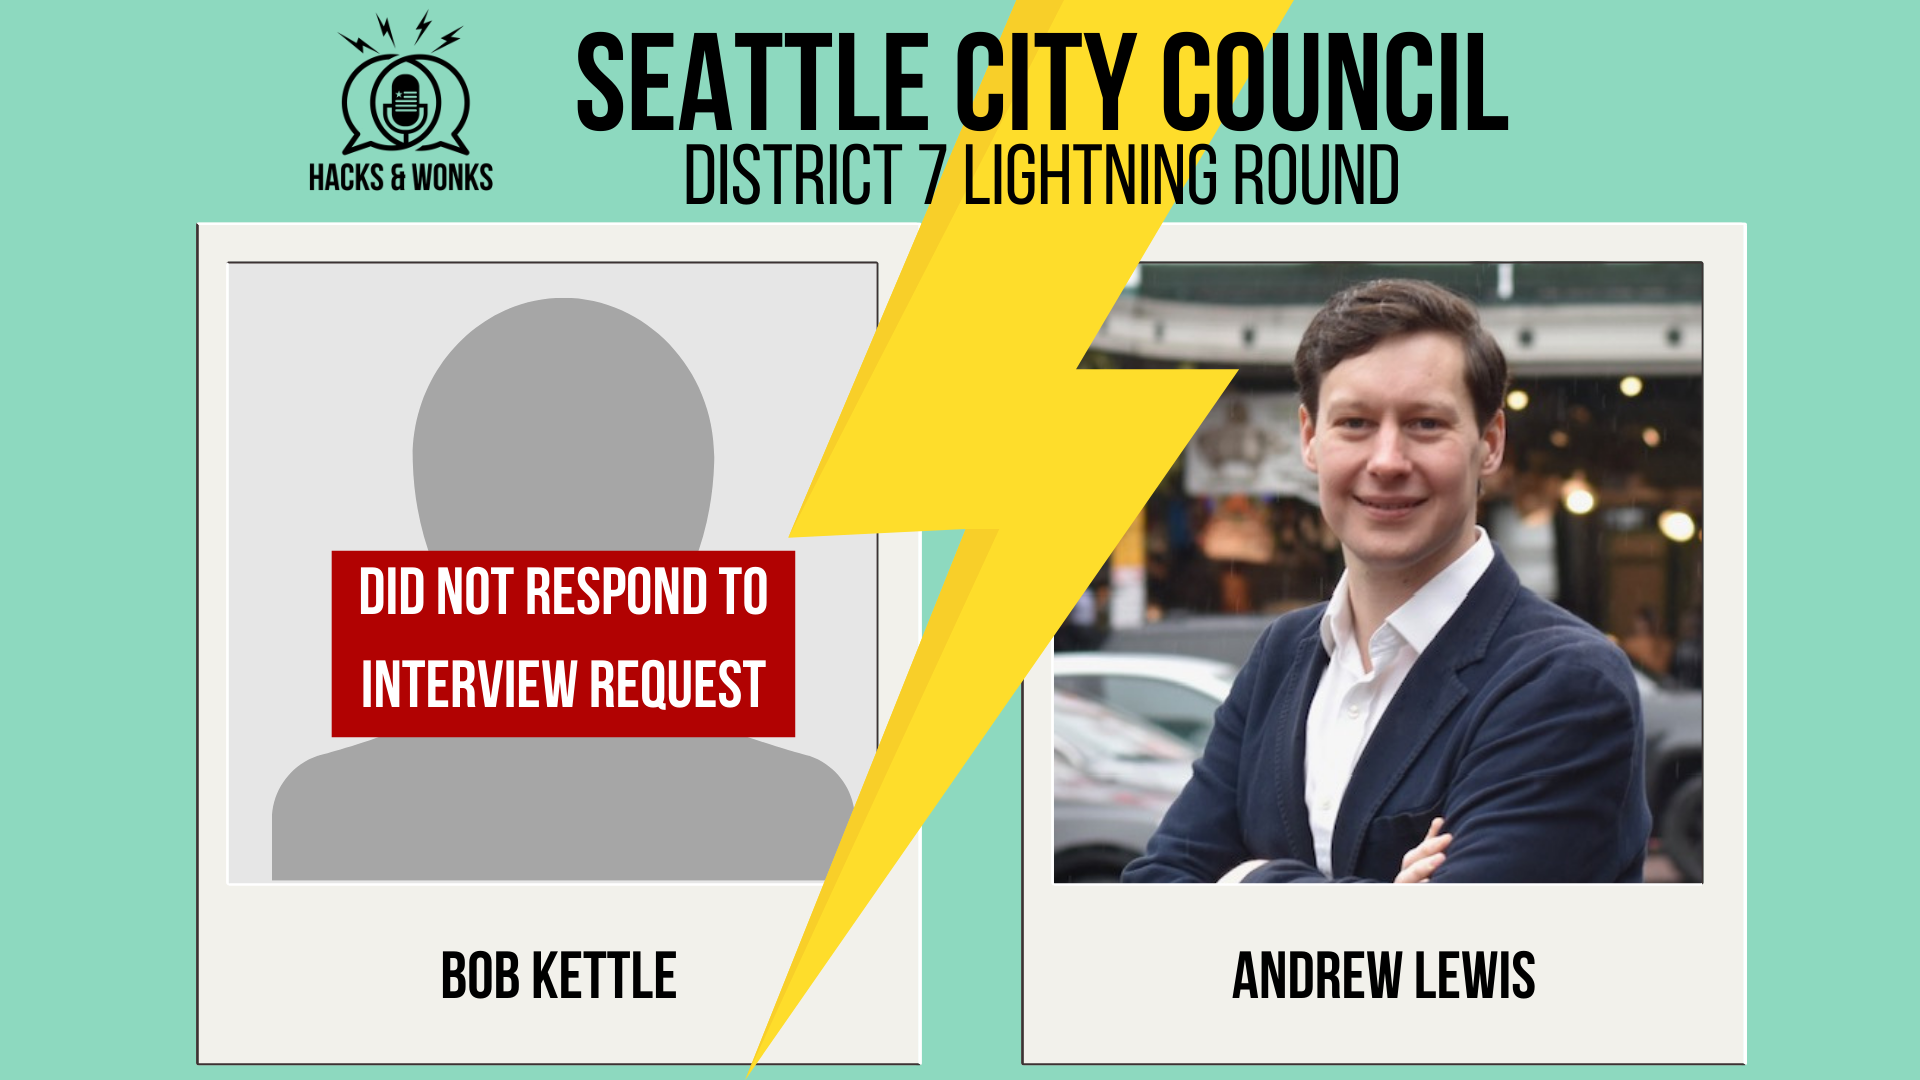 Hacks & Wonks Seattle City Council District 7 Lightning Round  Lightning bolt divides District 7 candidates: Bob Kettle (placeholder image with “DID NOT RESPOND TO INTERVIEW REQUEST” across it) and Andrew Lewis (campaign photo)